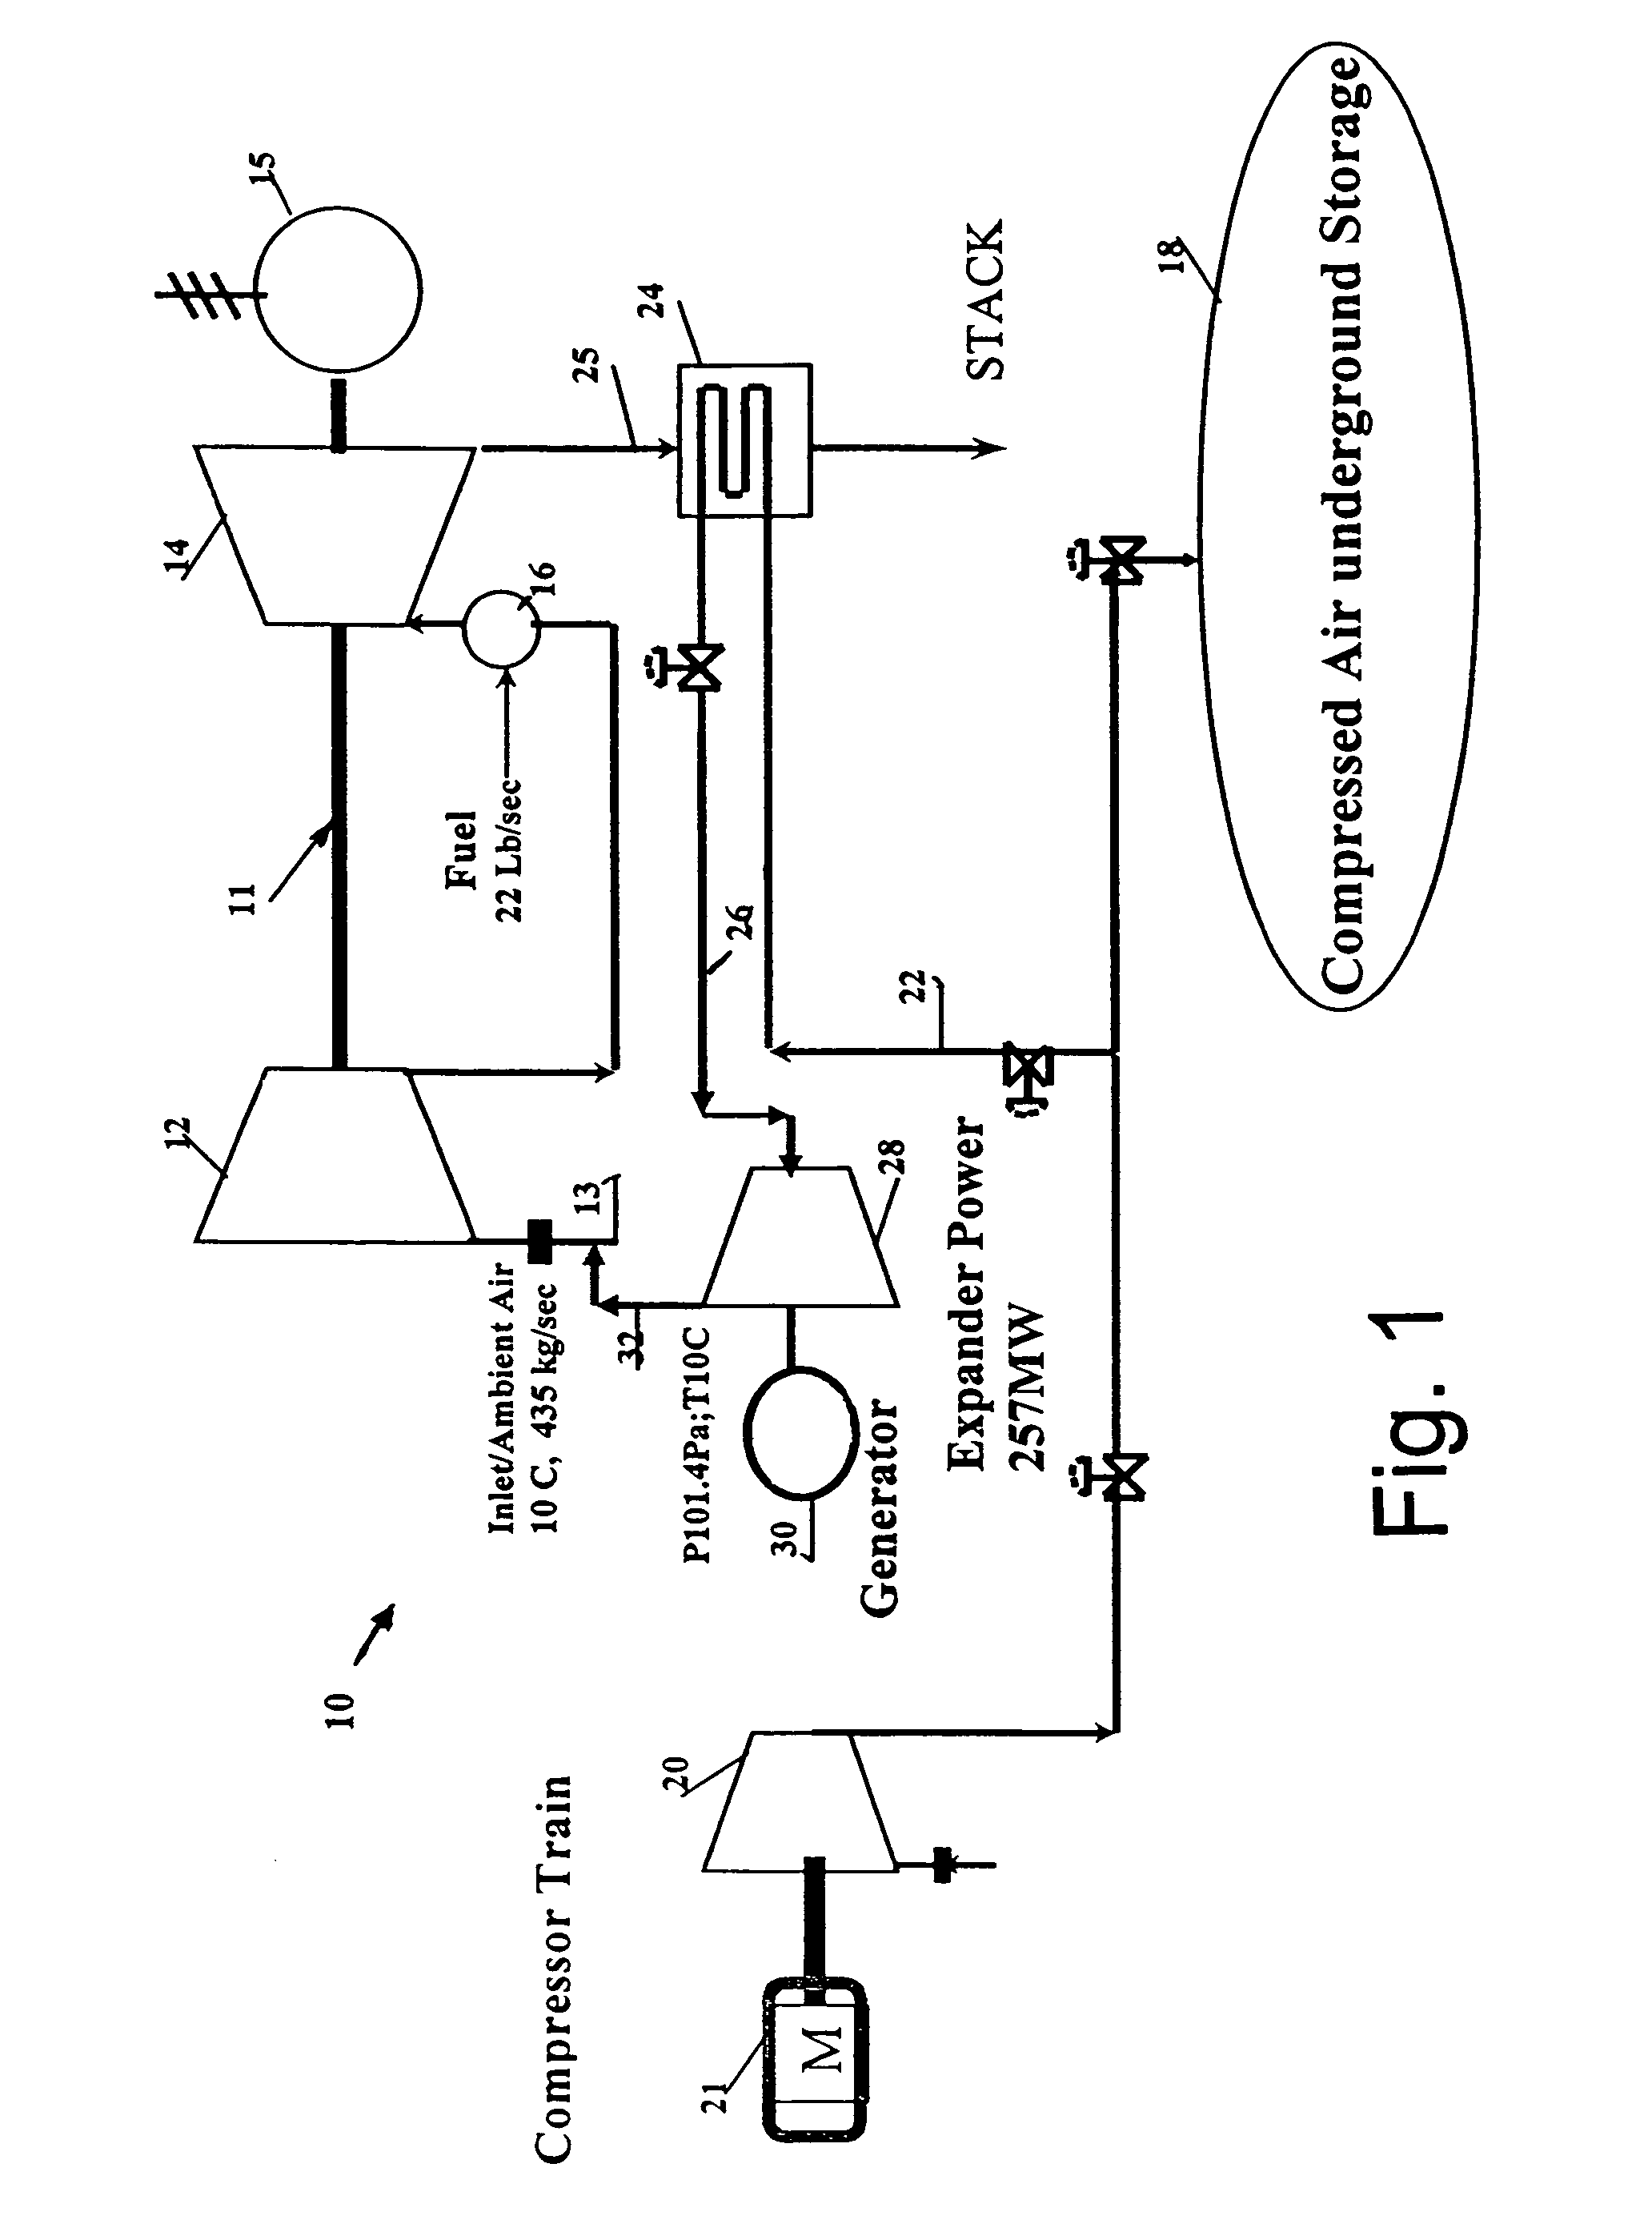 Power augmentation of combustion turbines by injection of cold air upstream of compressor